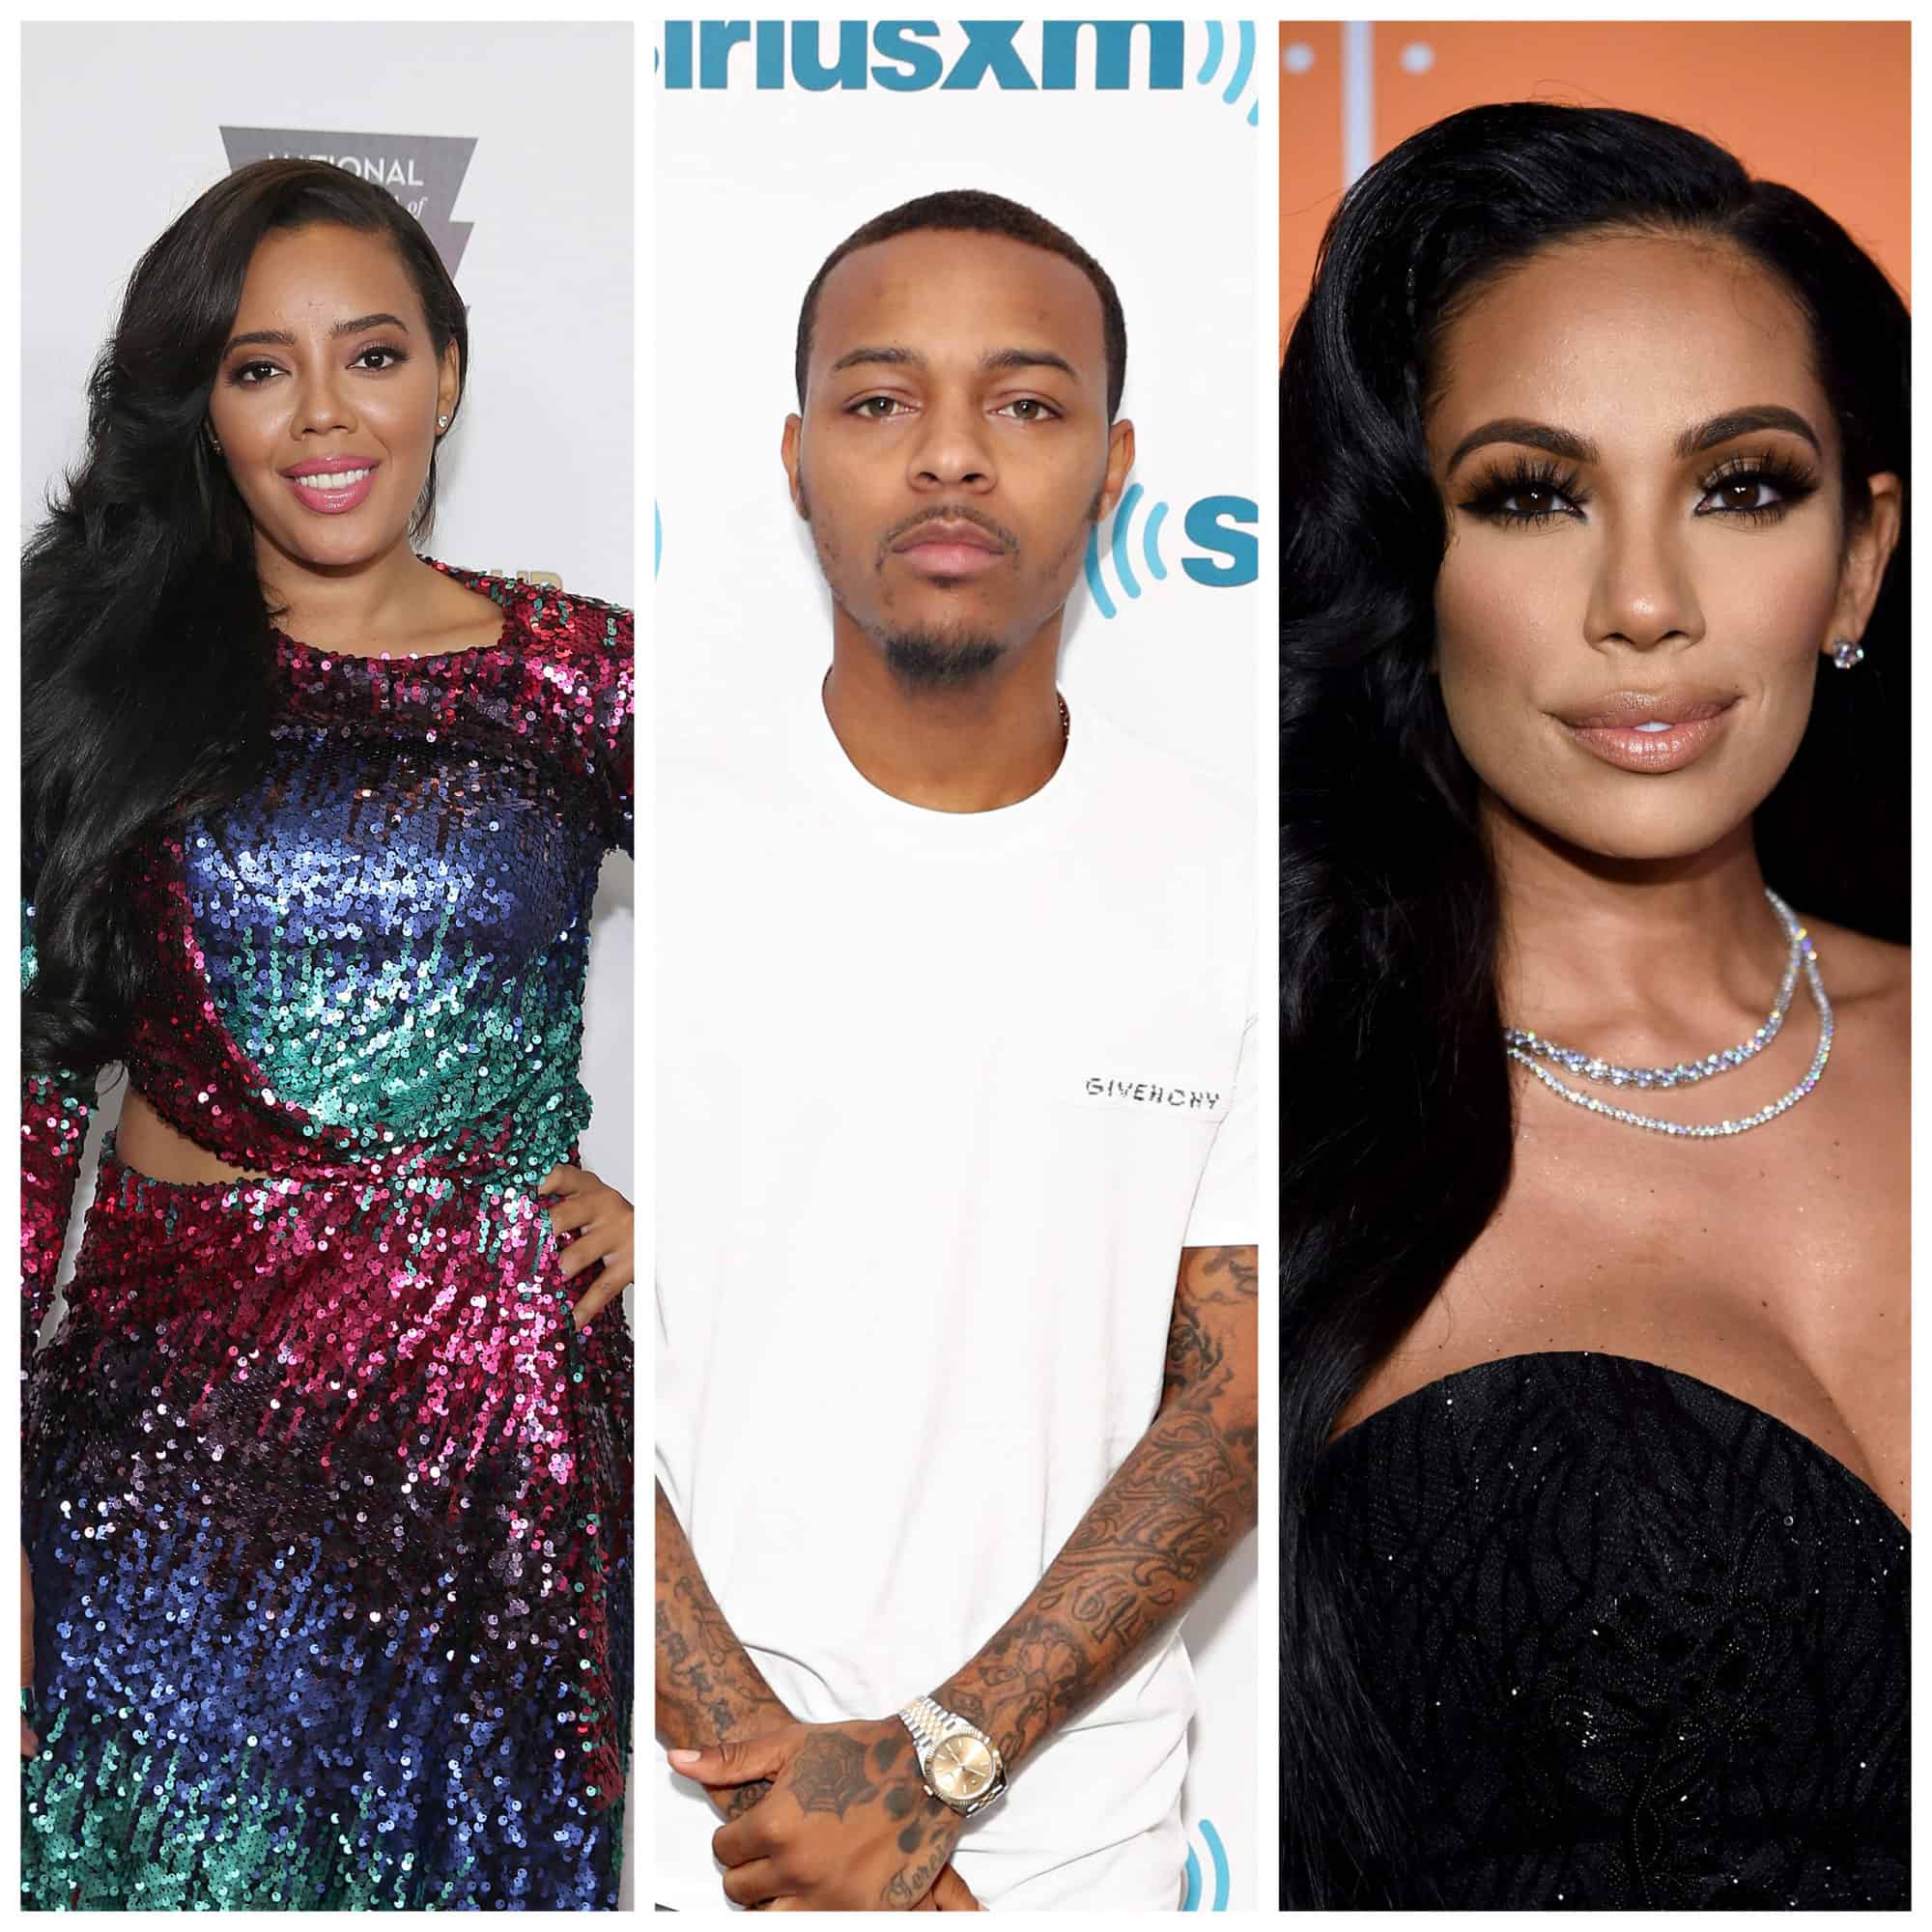 Angela Simmons, Bow Wow and Erica Mena